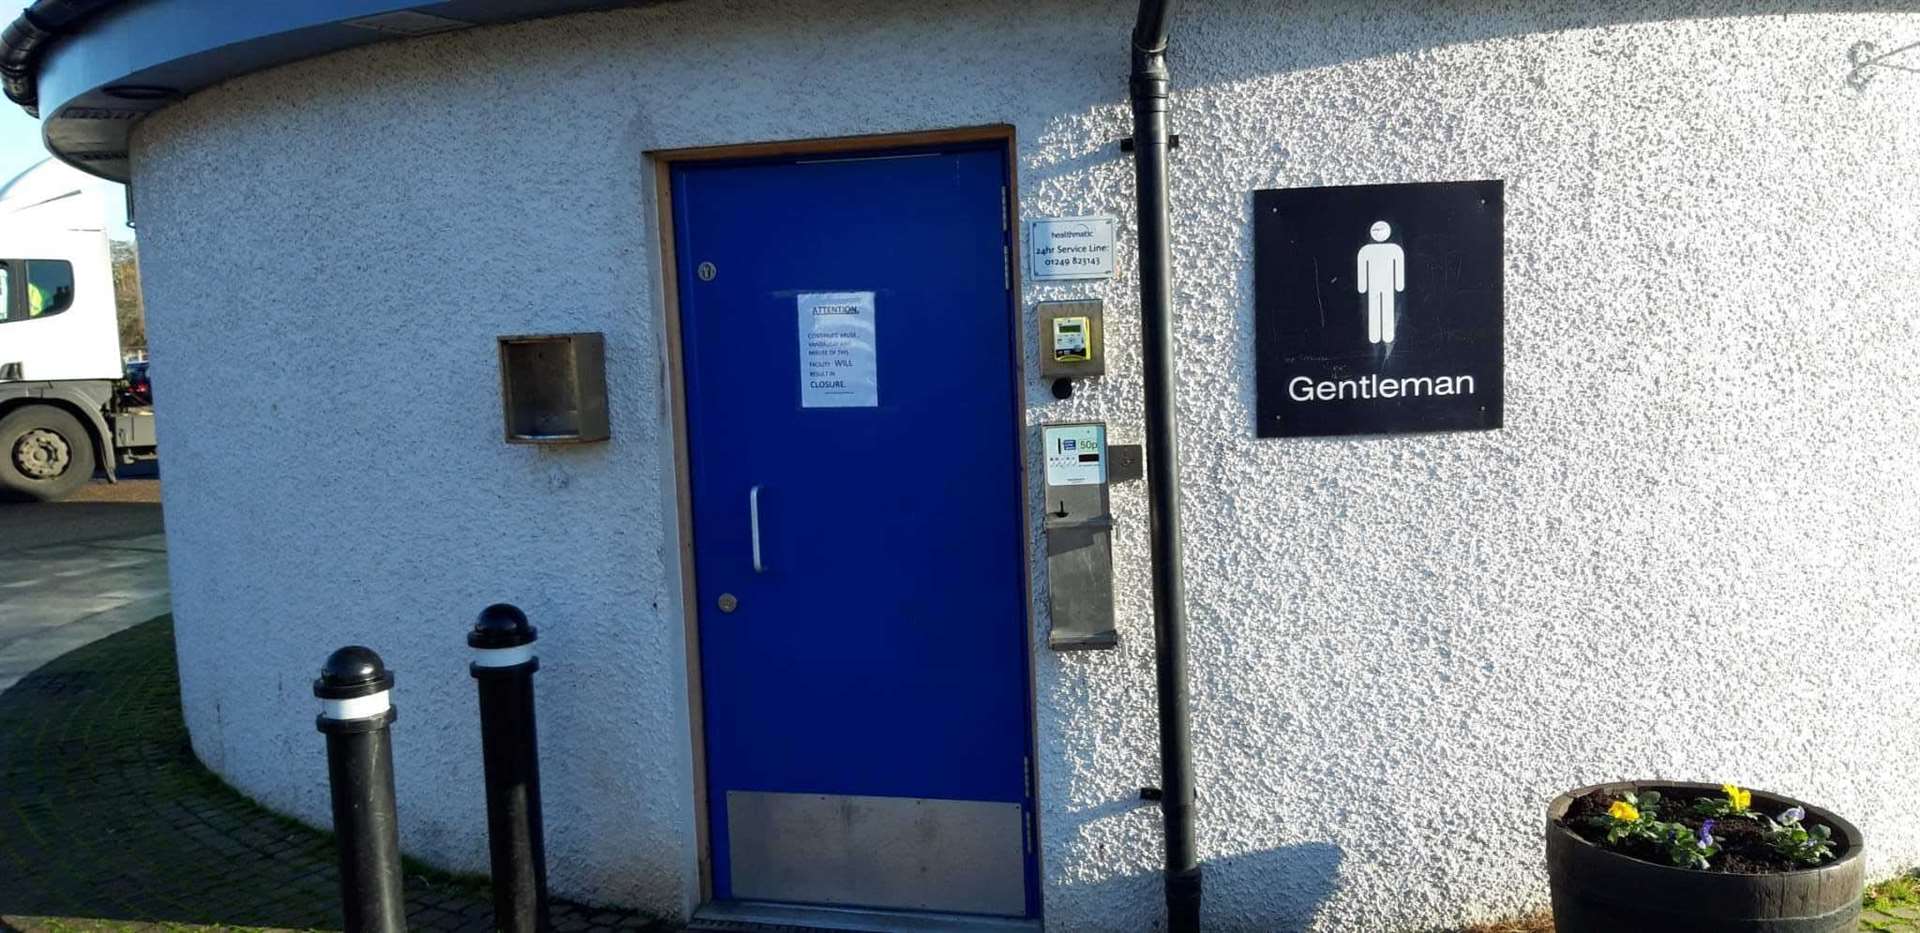 A 50p payment was required to enter the gents' toilets at Golspie but the pay meter is to be removed because of constant vandalism.